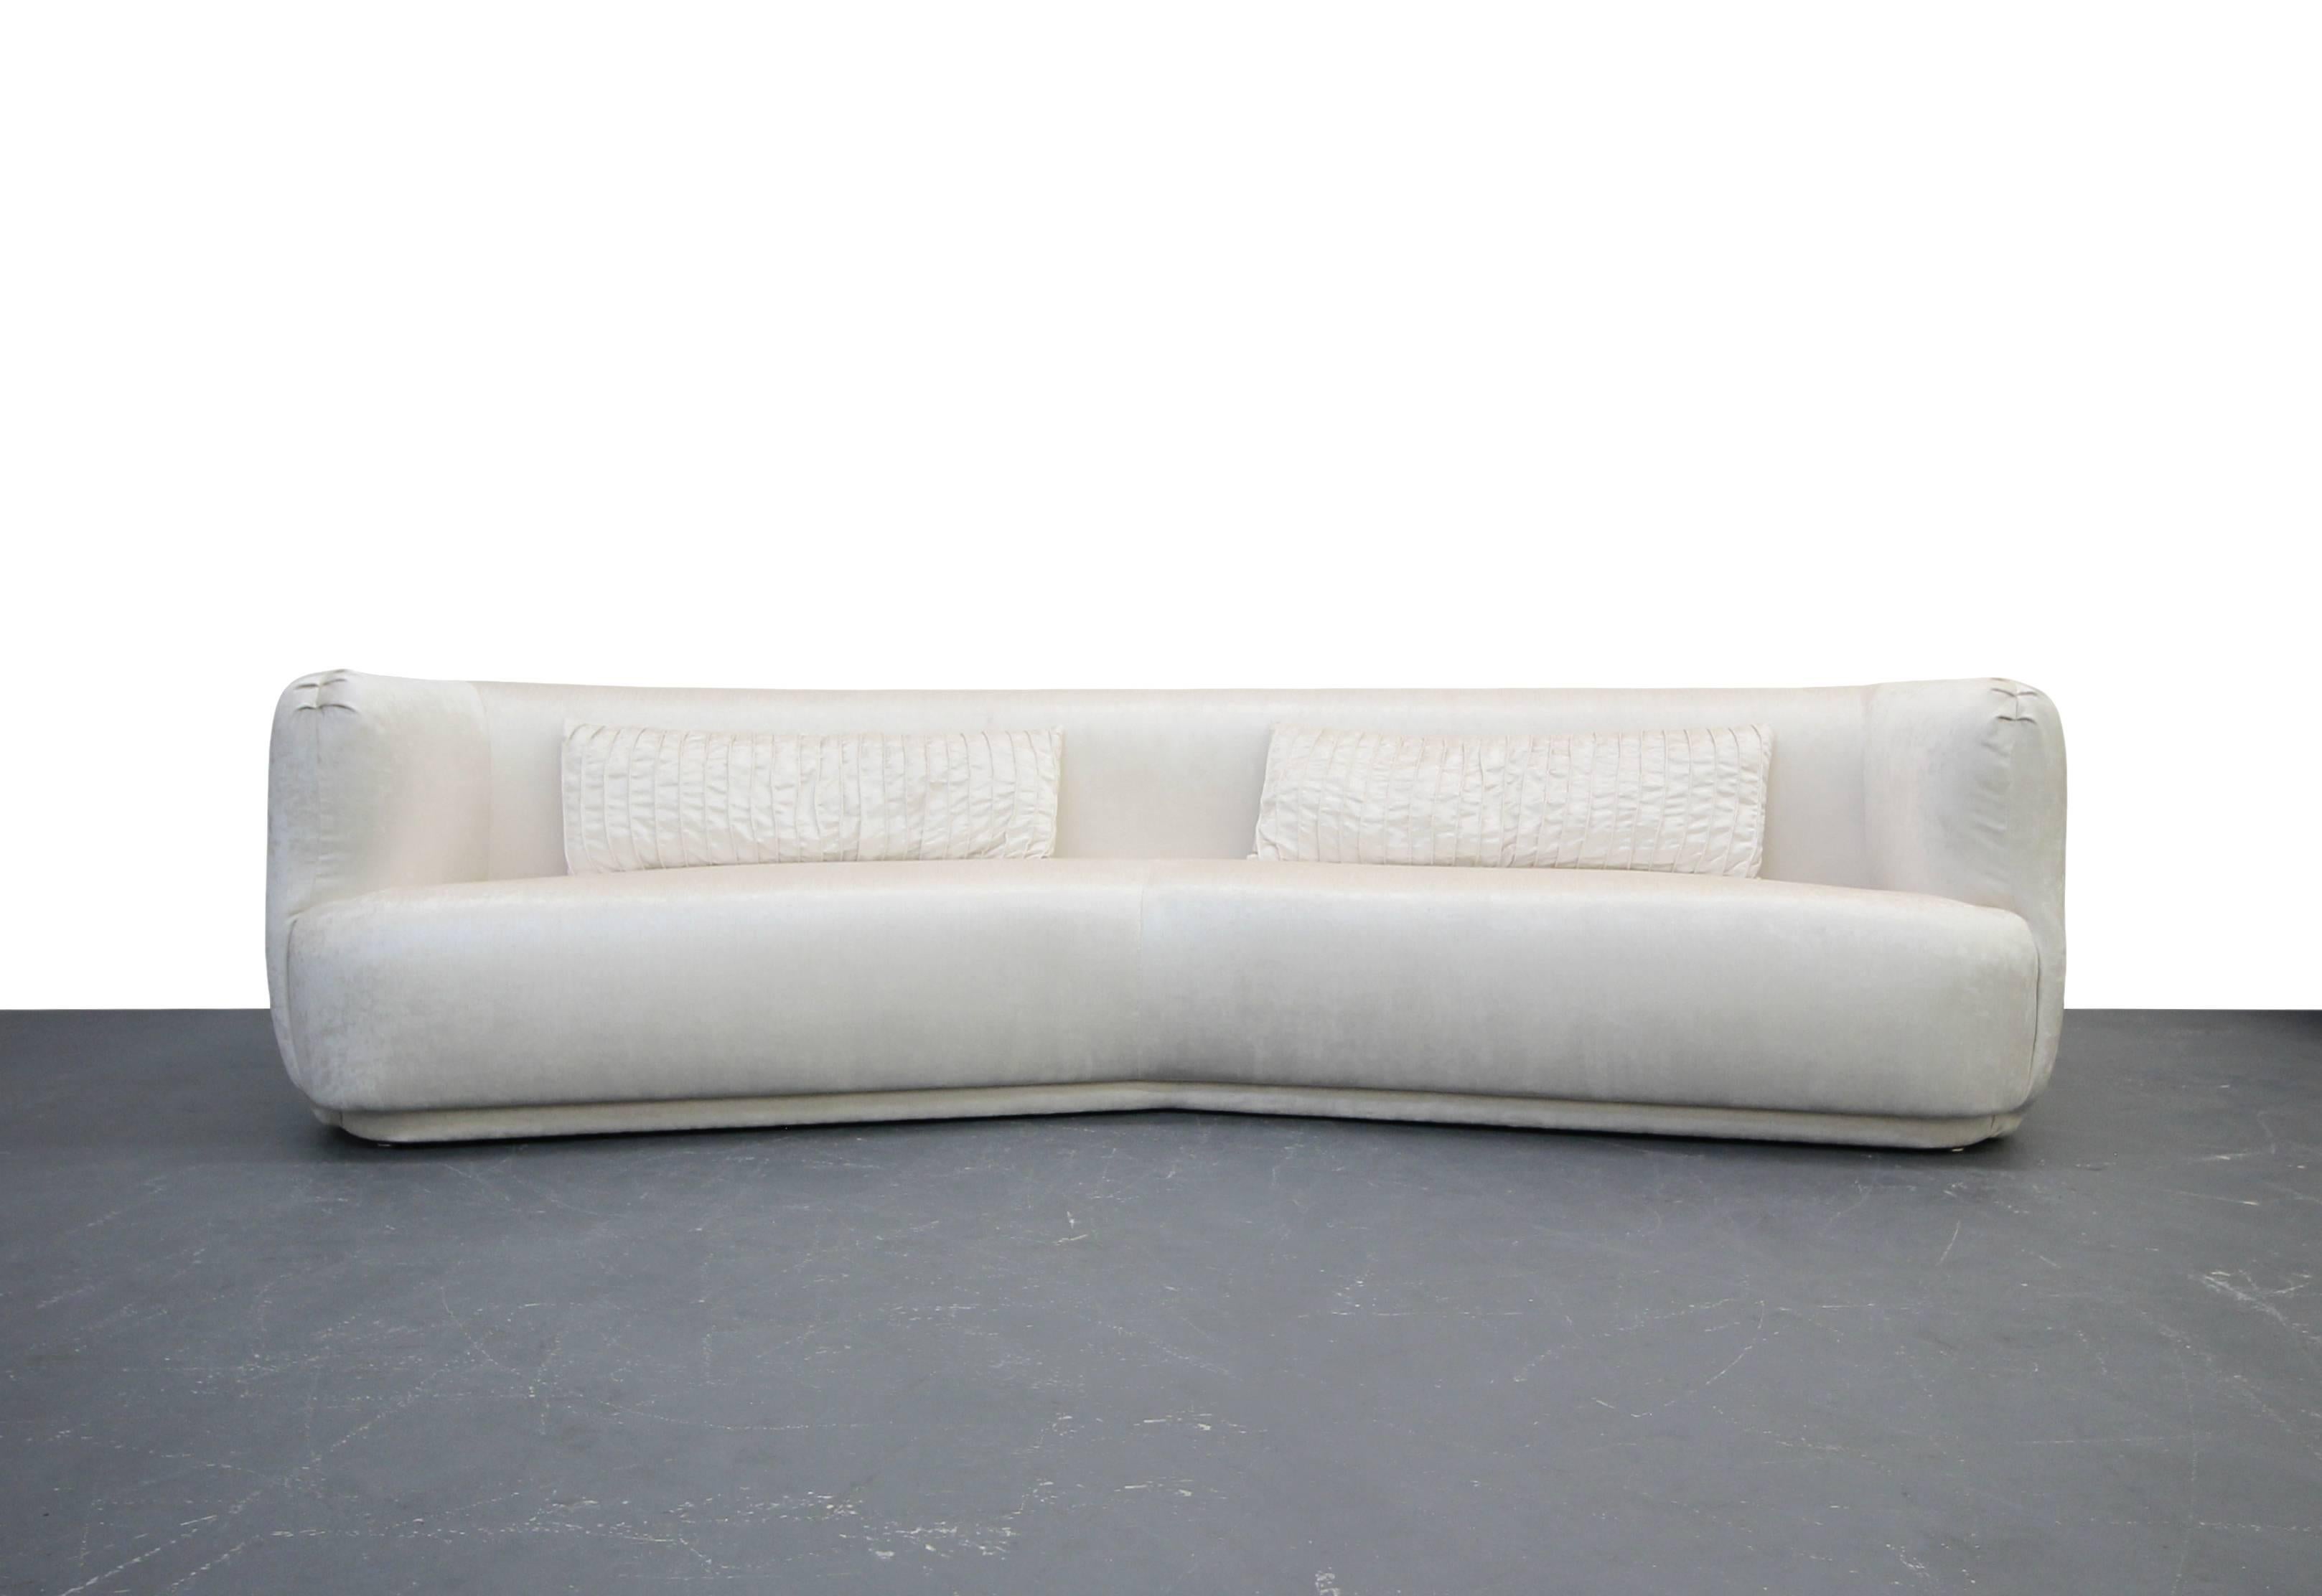 Freshly reupholstered in a beautiful cream color, high quality velvet, this beauty is dressed to impress. Angled sofas are rare, and to find one with these round edges is basically impossible. Stunning pieces, completely restored and ready for its